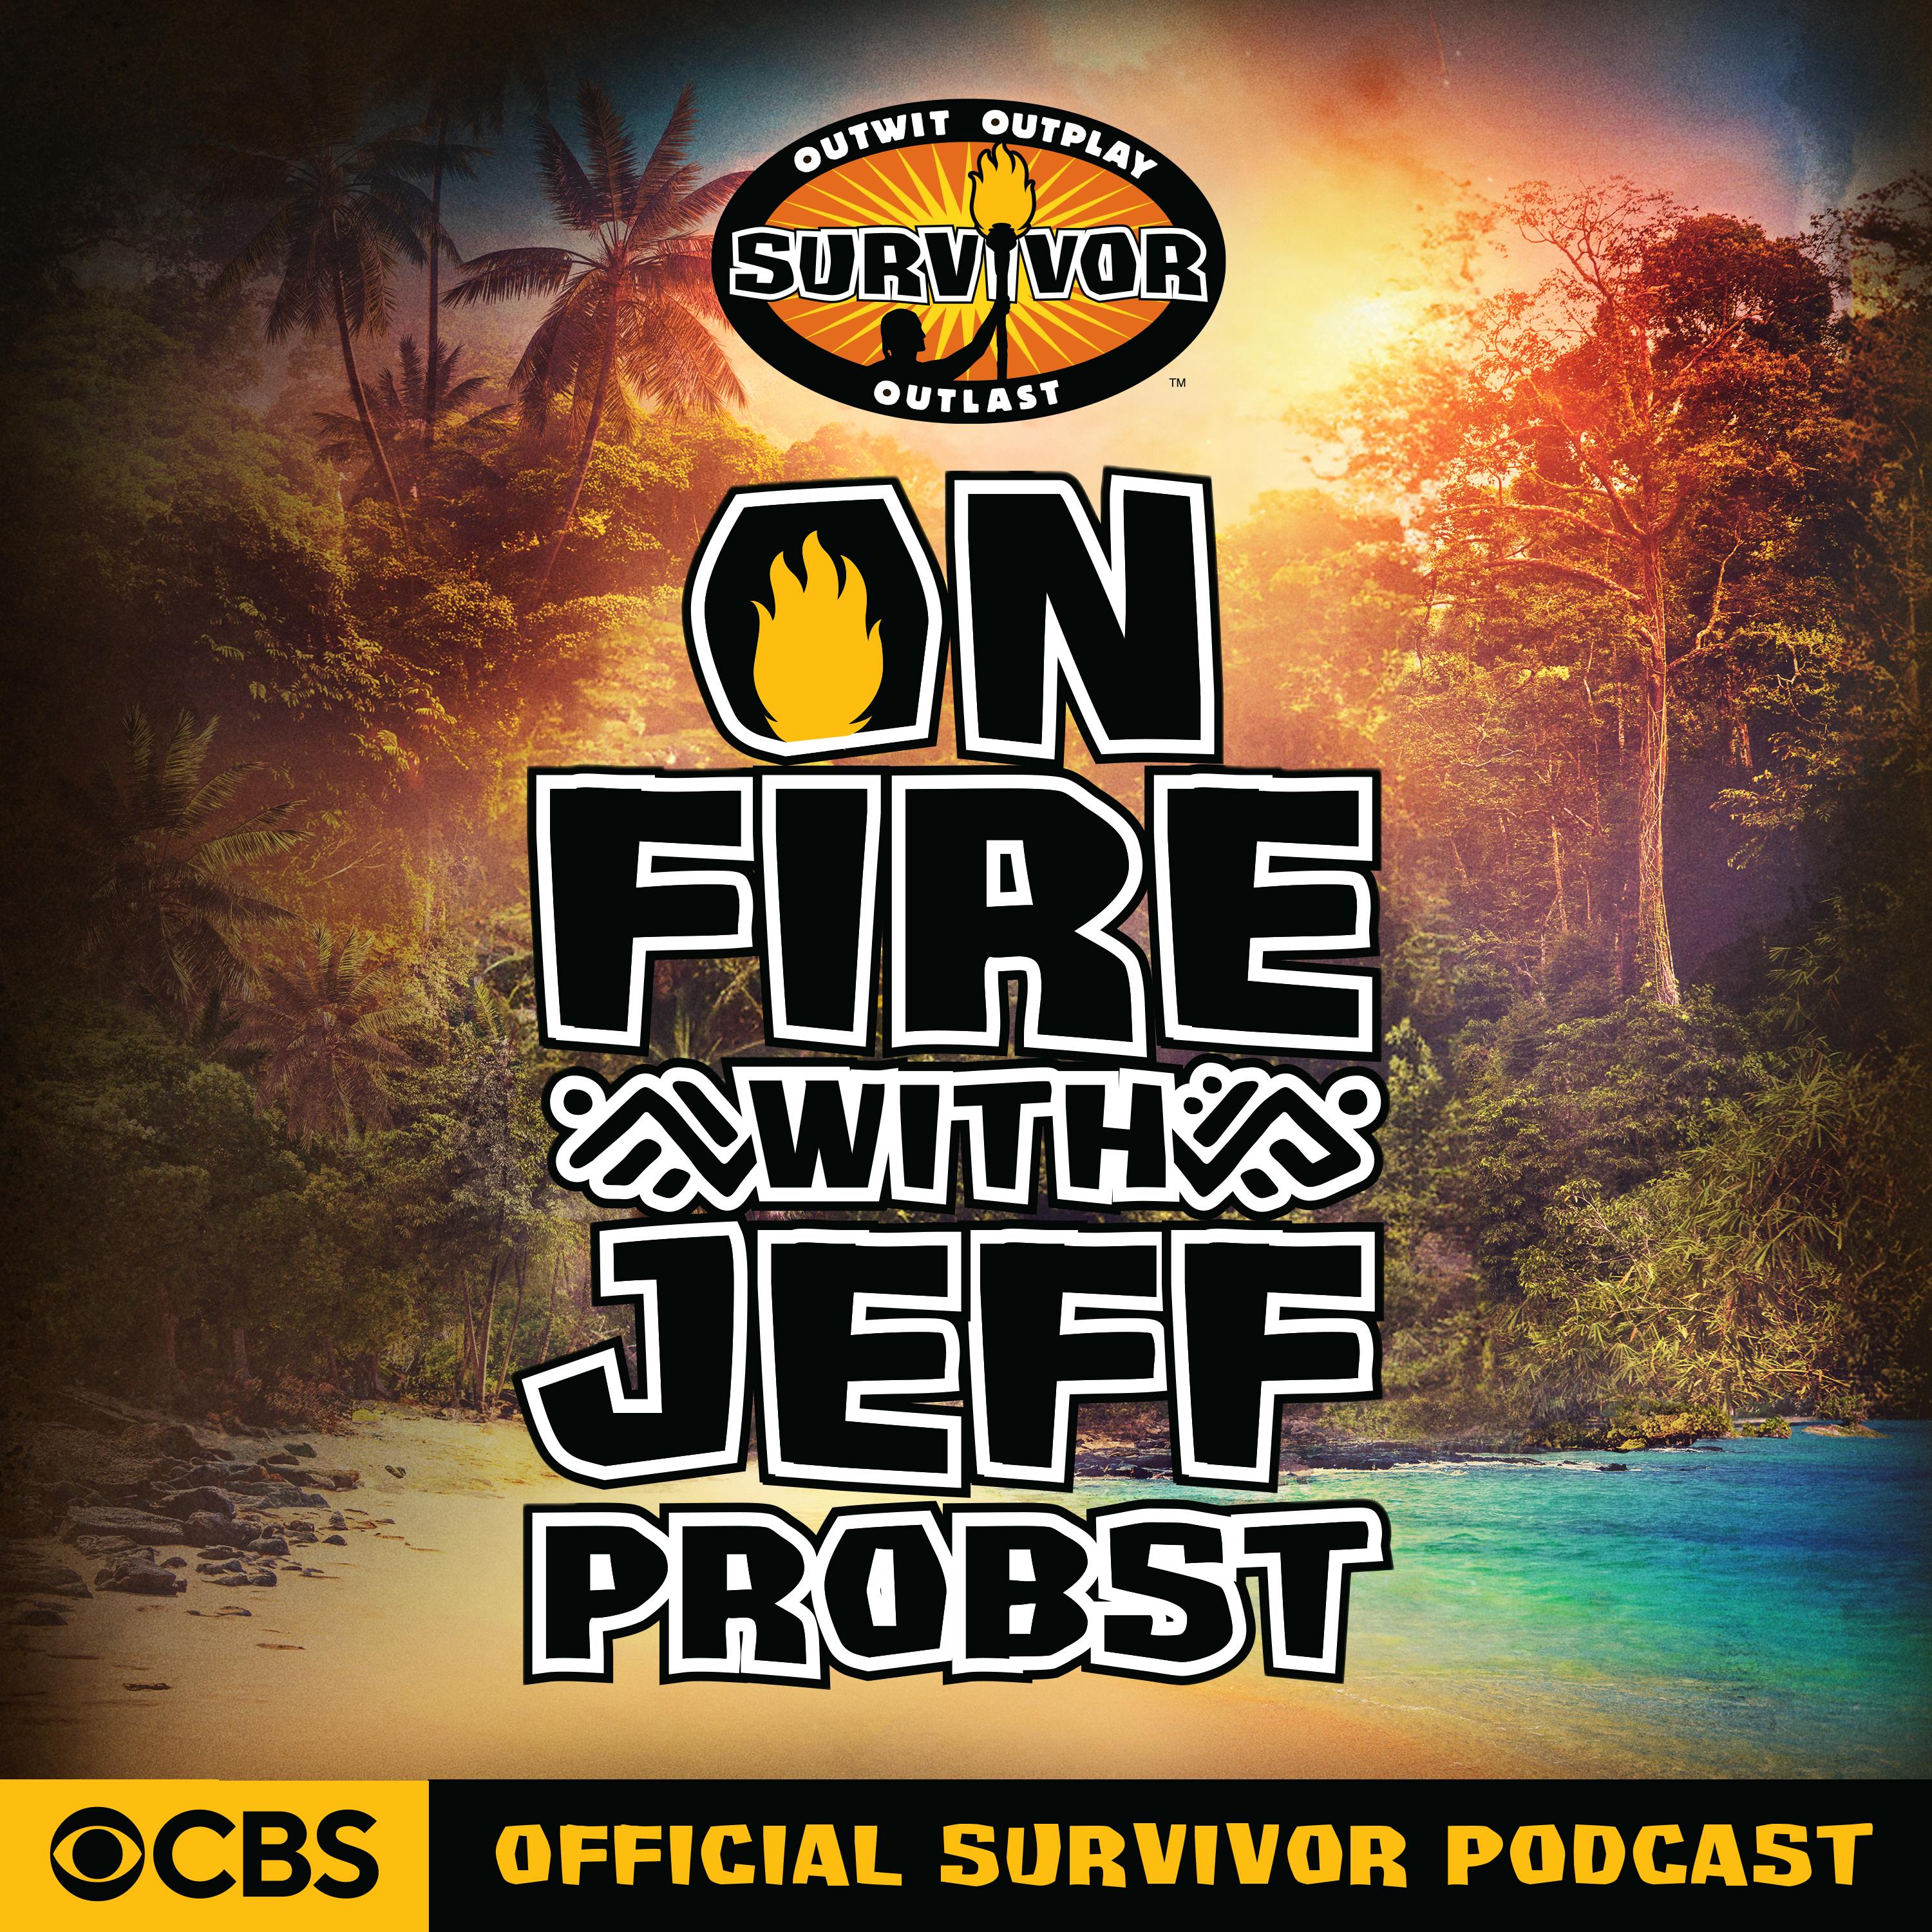 On Fire with Jeff Probst: The Official Survivor Podcast podcast show image